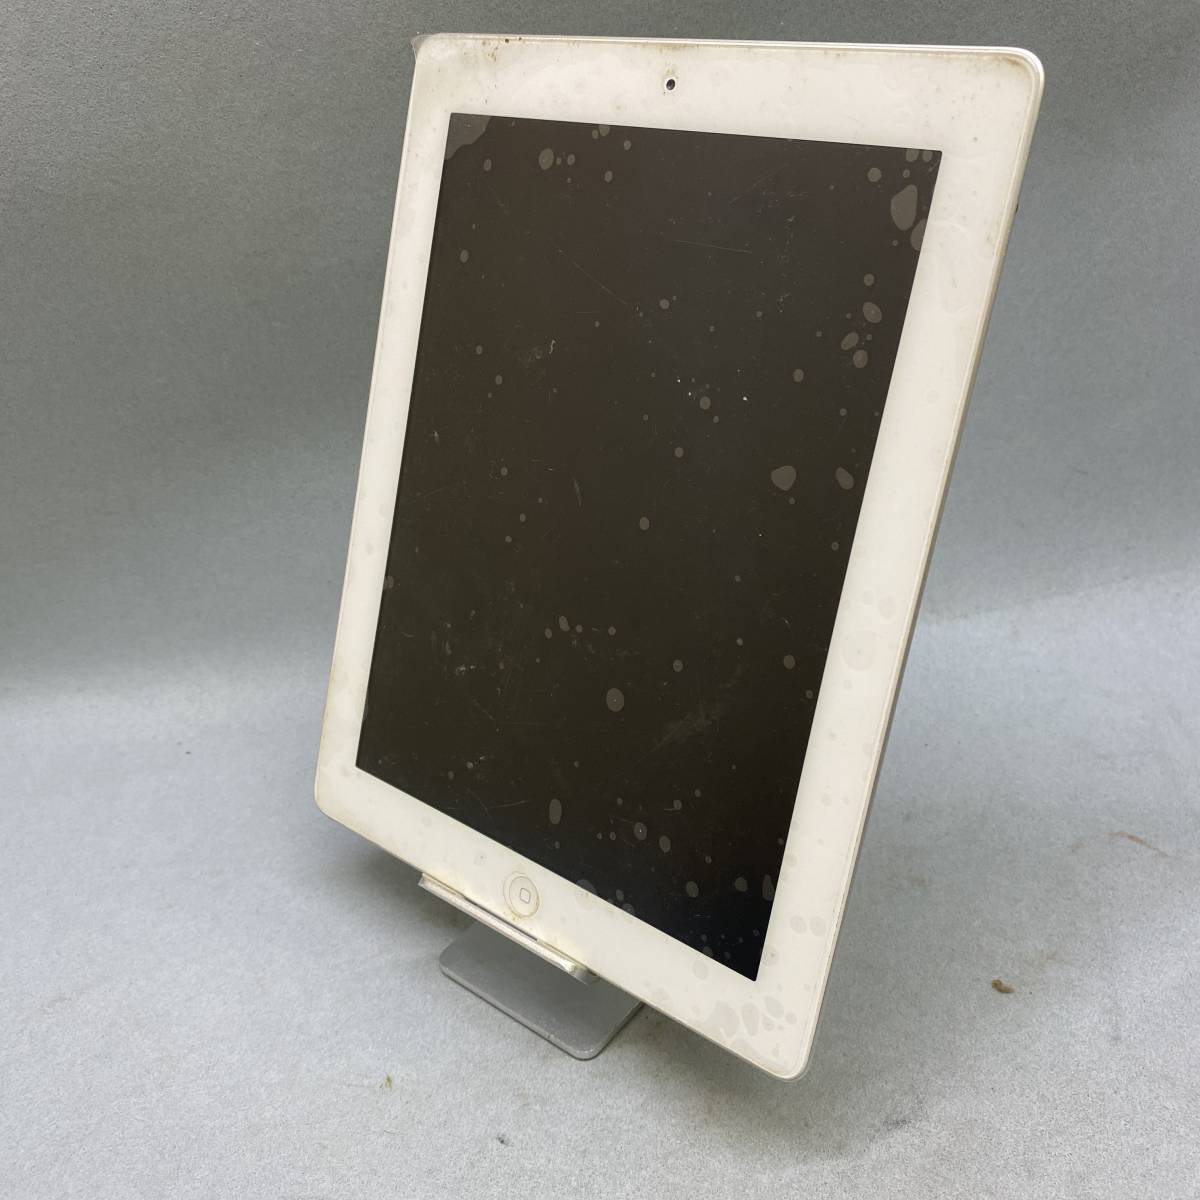 ▲ apple iPhone iPad 6点 まとめ スマホ タブレット A1954 A1416 A1395 A1241 A1688 A1524 ジャンク品 ▲ G12157_画像4